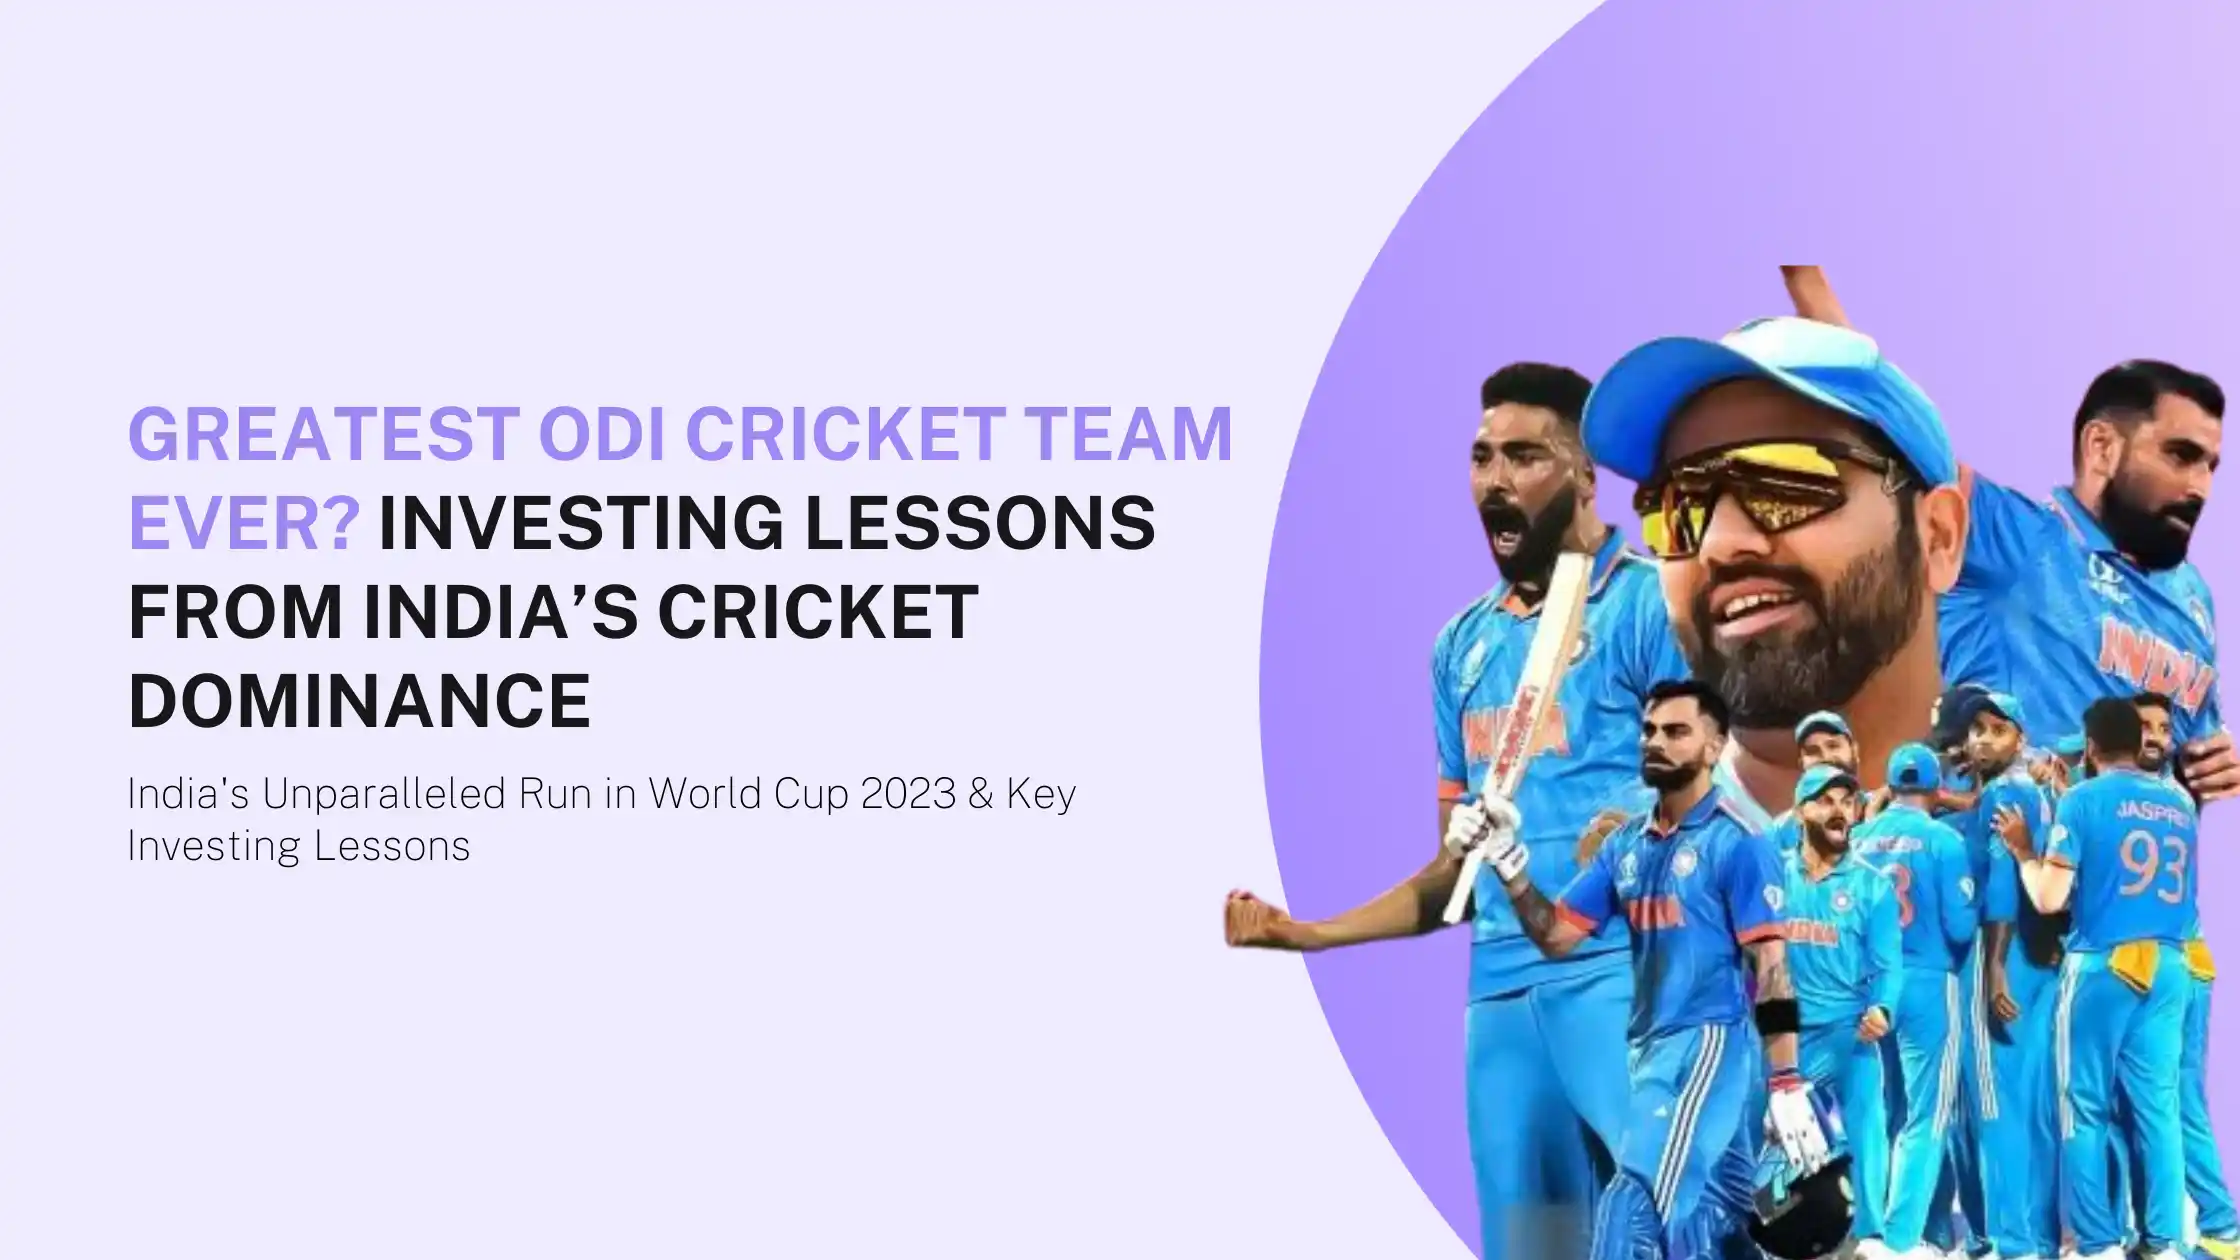 Greatest ODI Cricket Team Ever? Investing Lessons From India’s Cricket Dominance